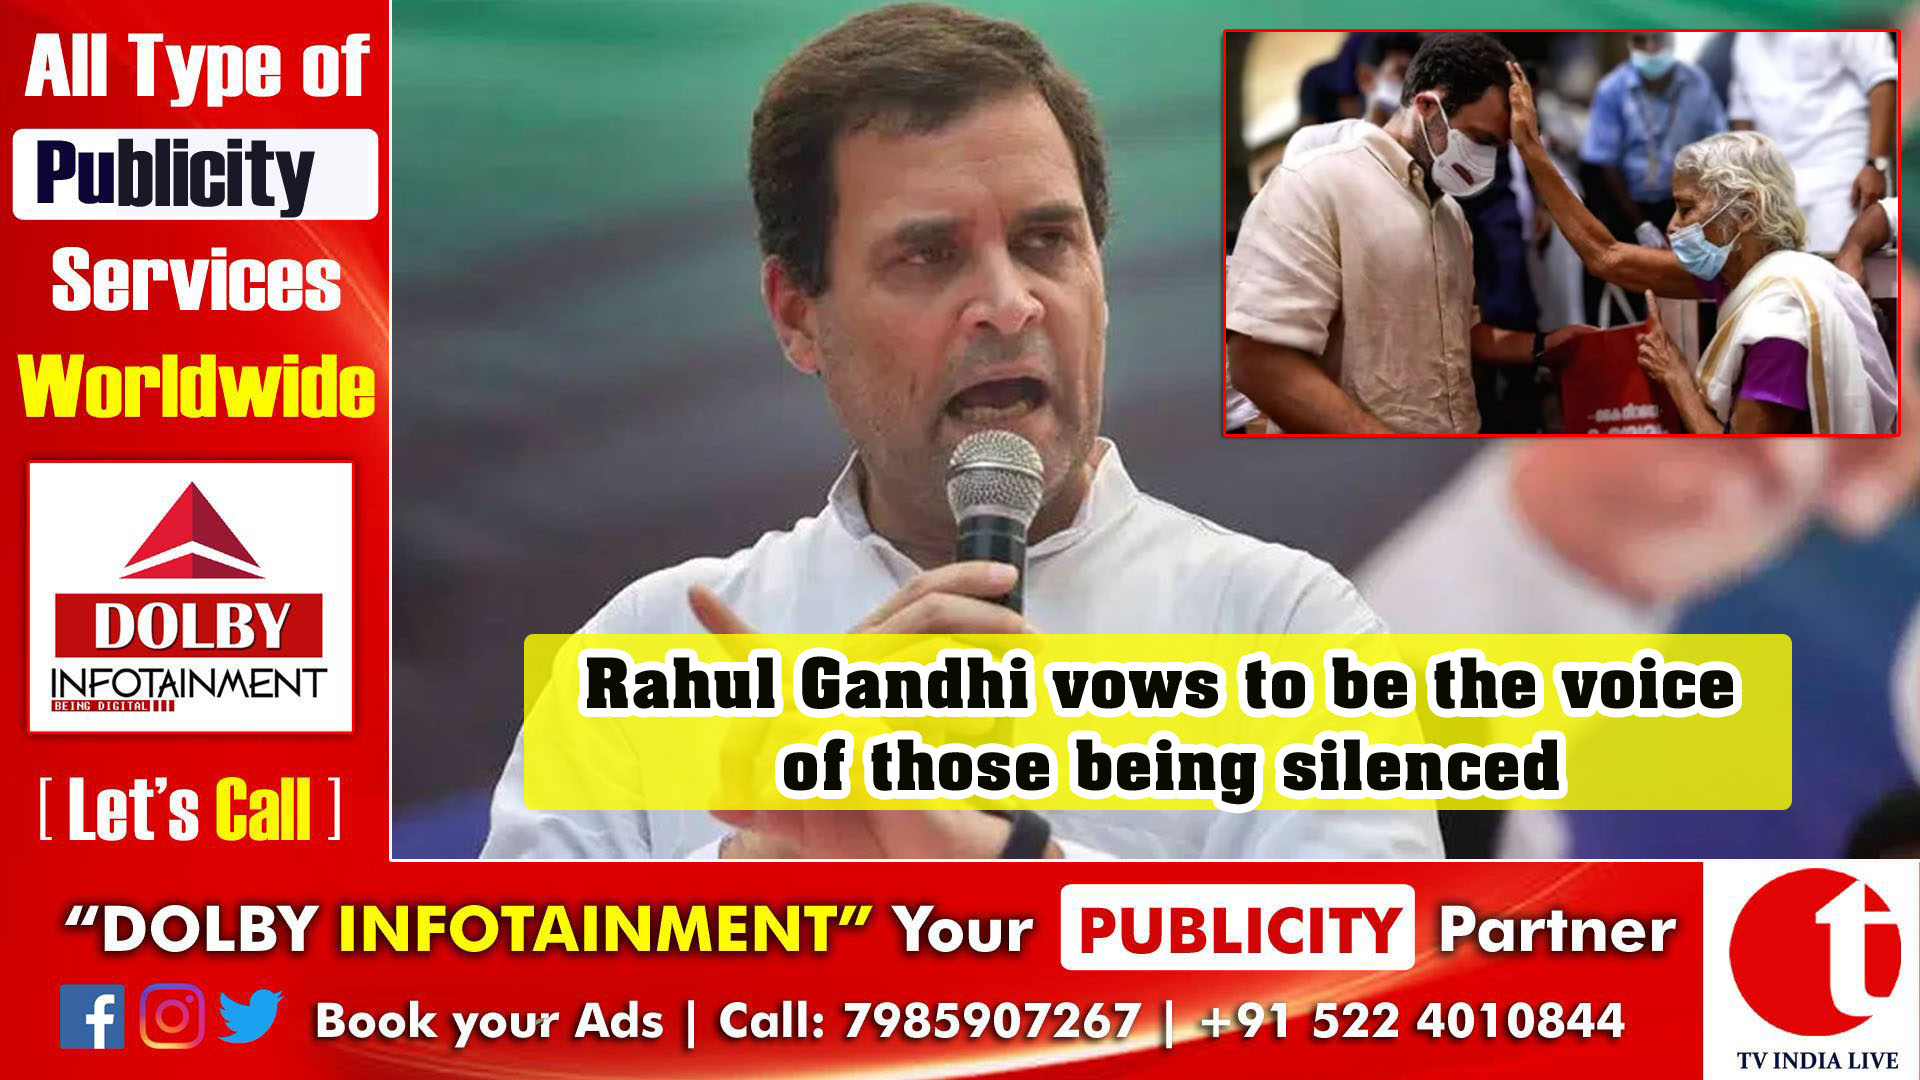 Rahul Gandhi vows to be the voice of those being silenced